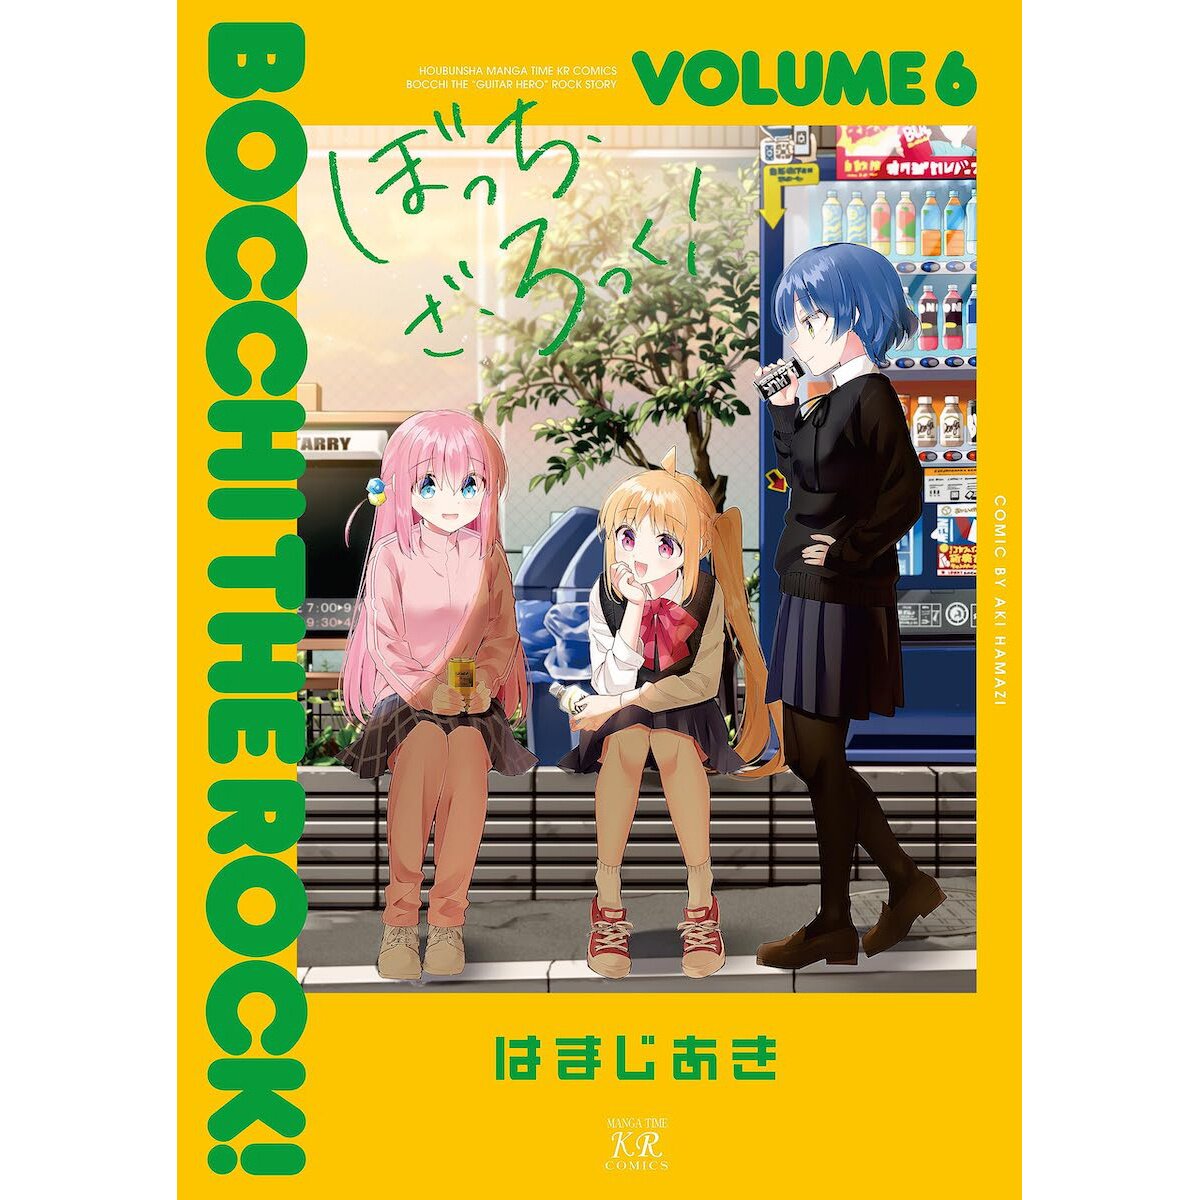 MyAnimeList.net - Bocchi the Rock! is now the highest rated non